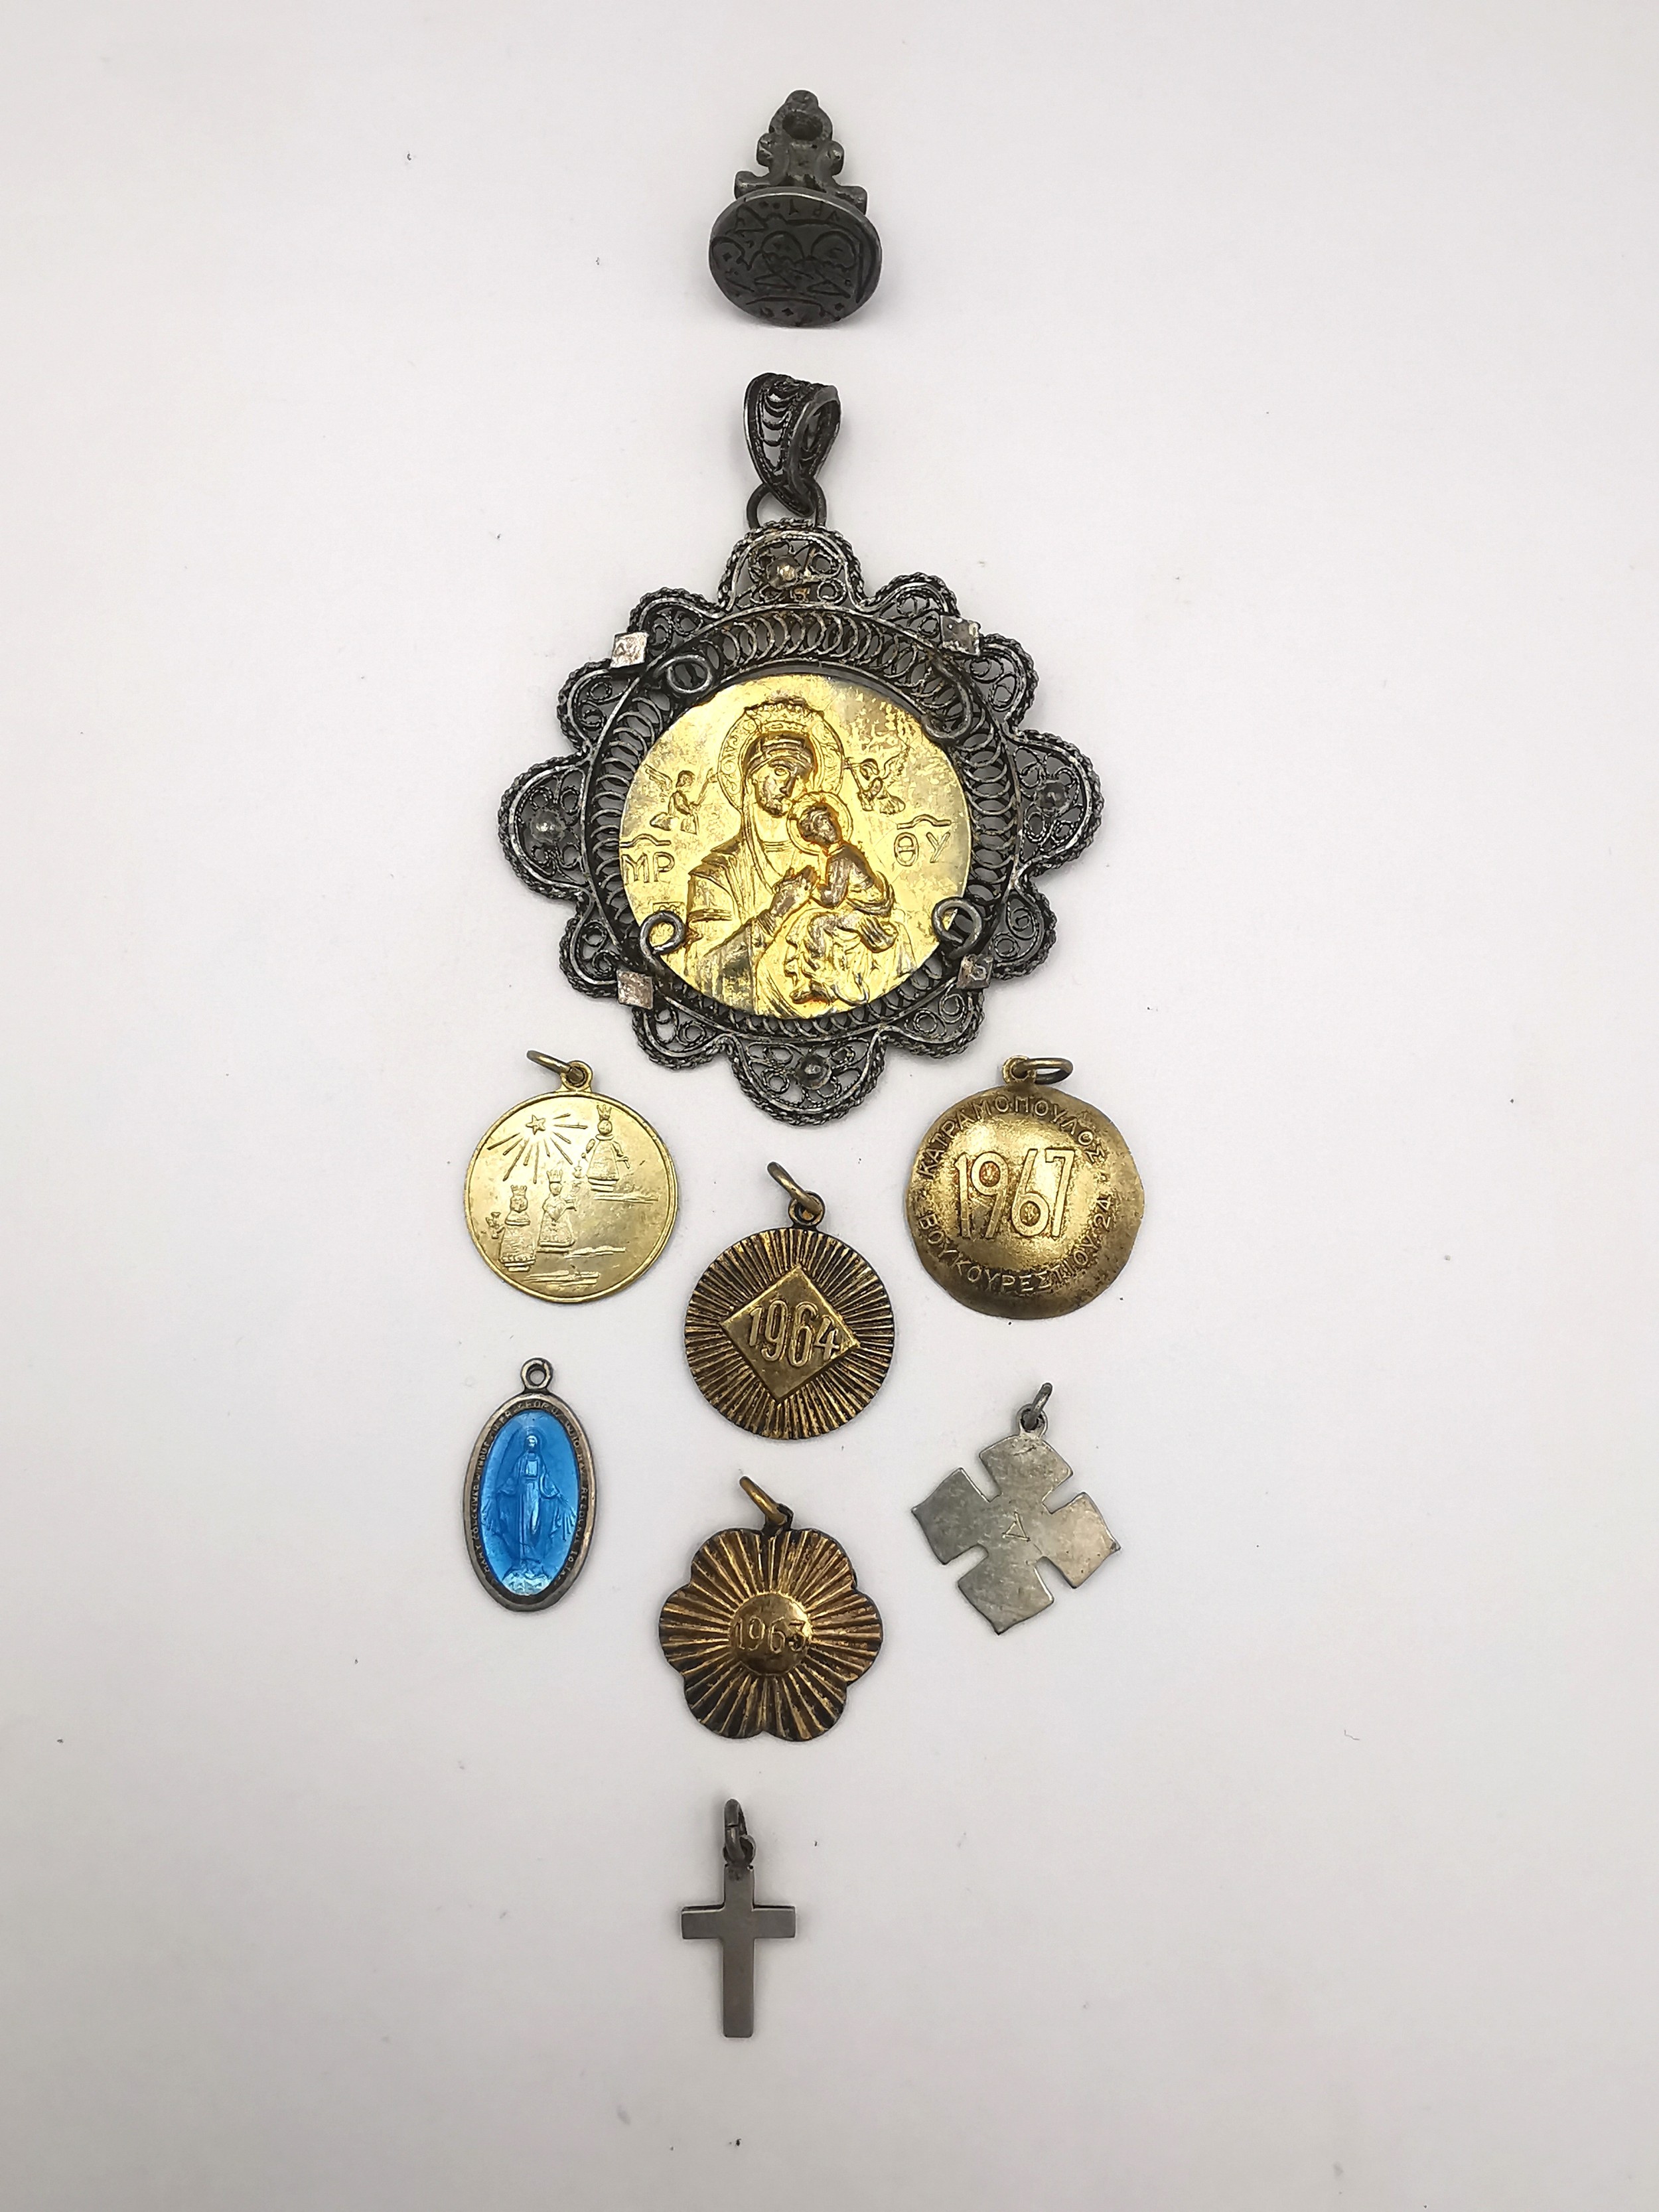 A collection of religious medallions, including a filigree wirework medallion of Mary and Jesus, a - Image 2 of 17